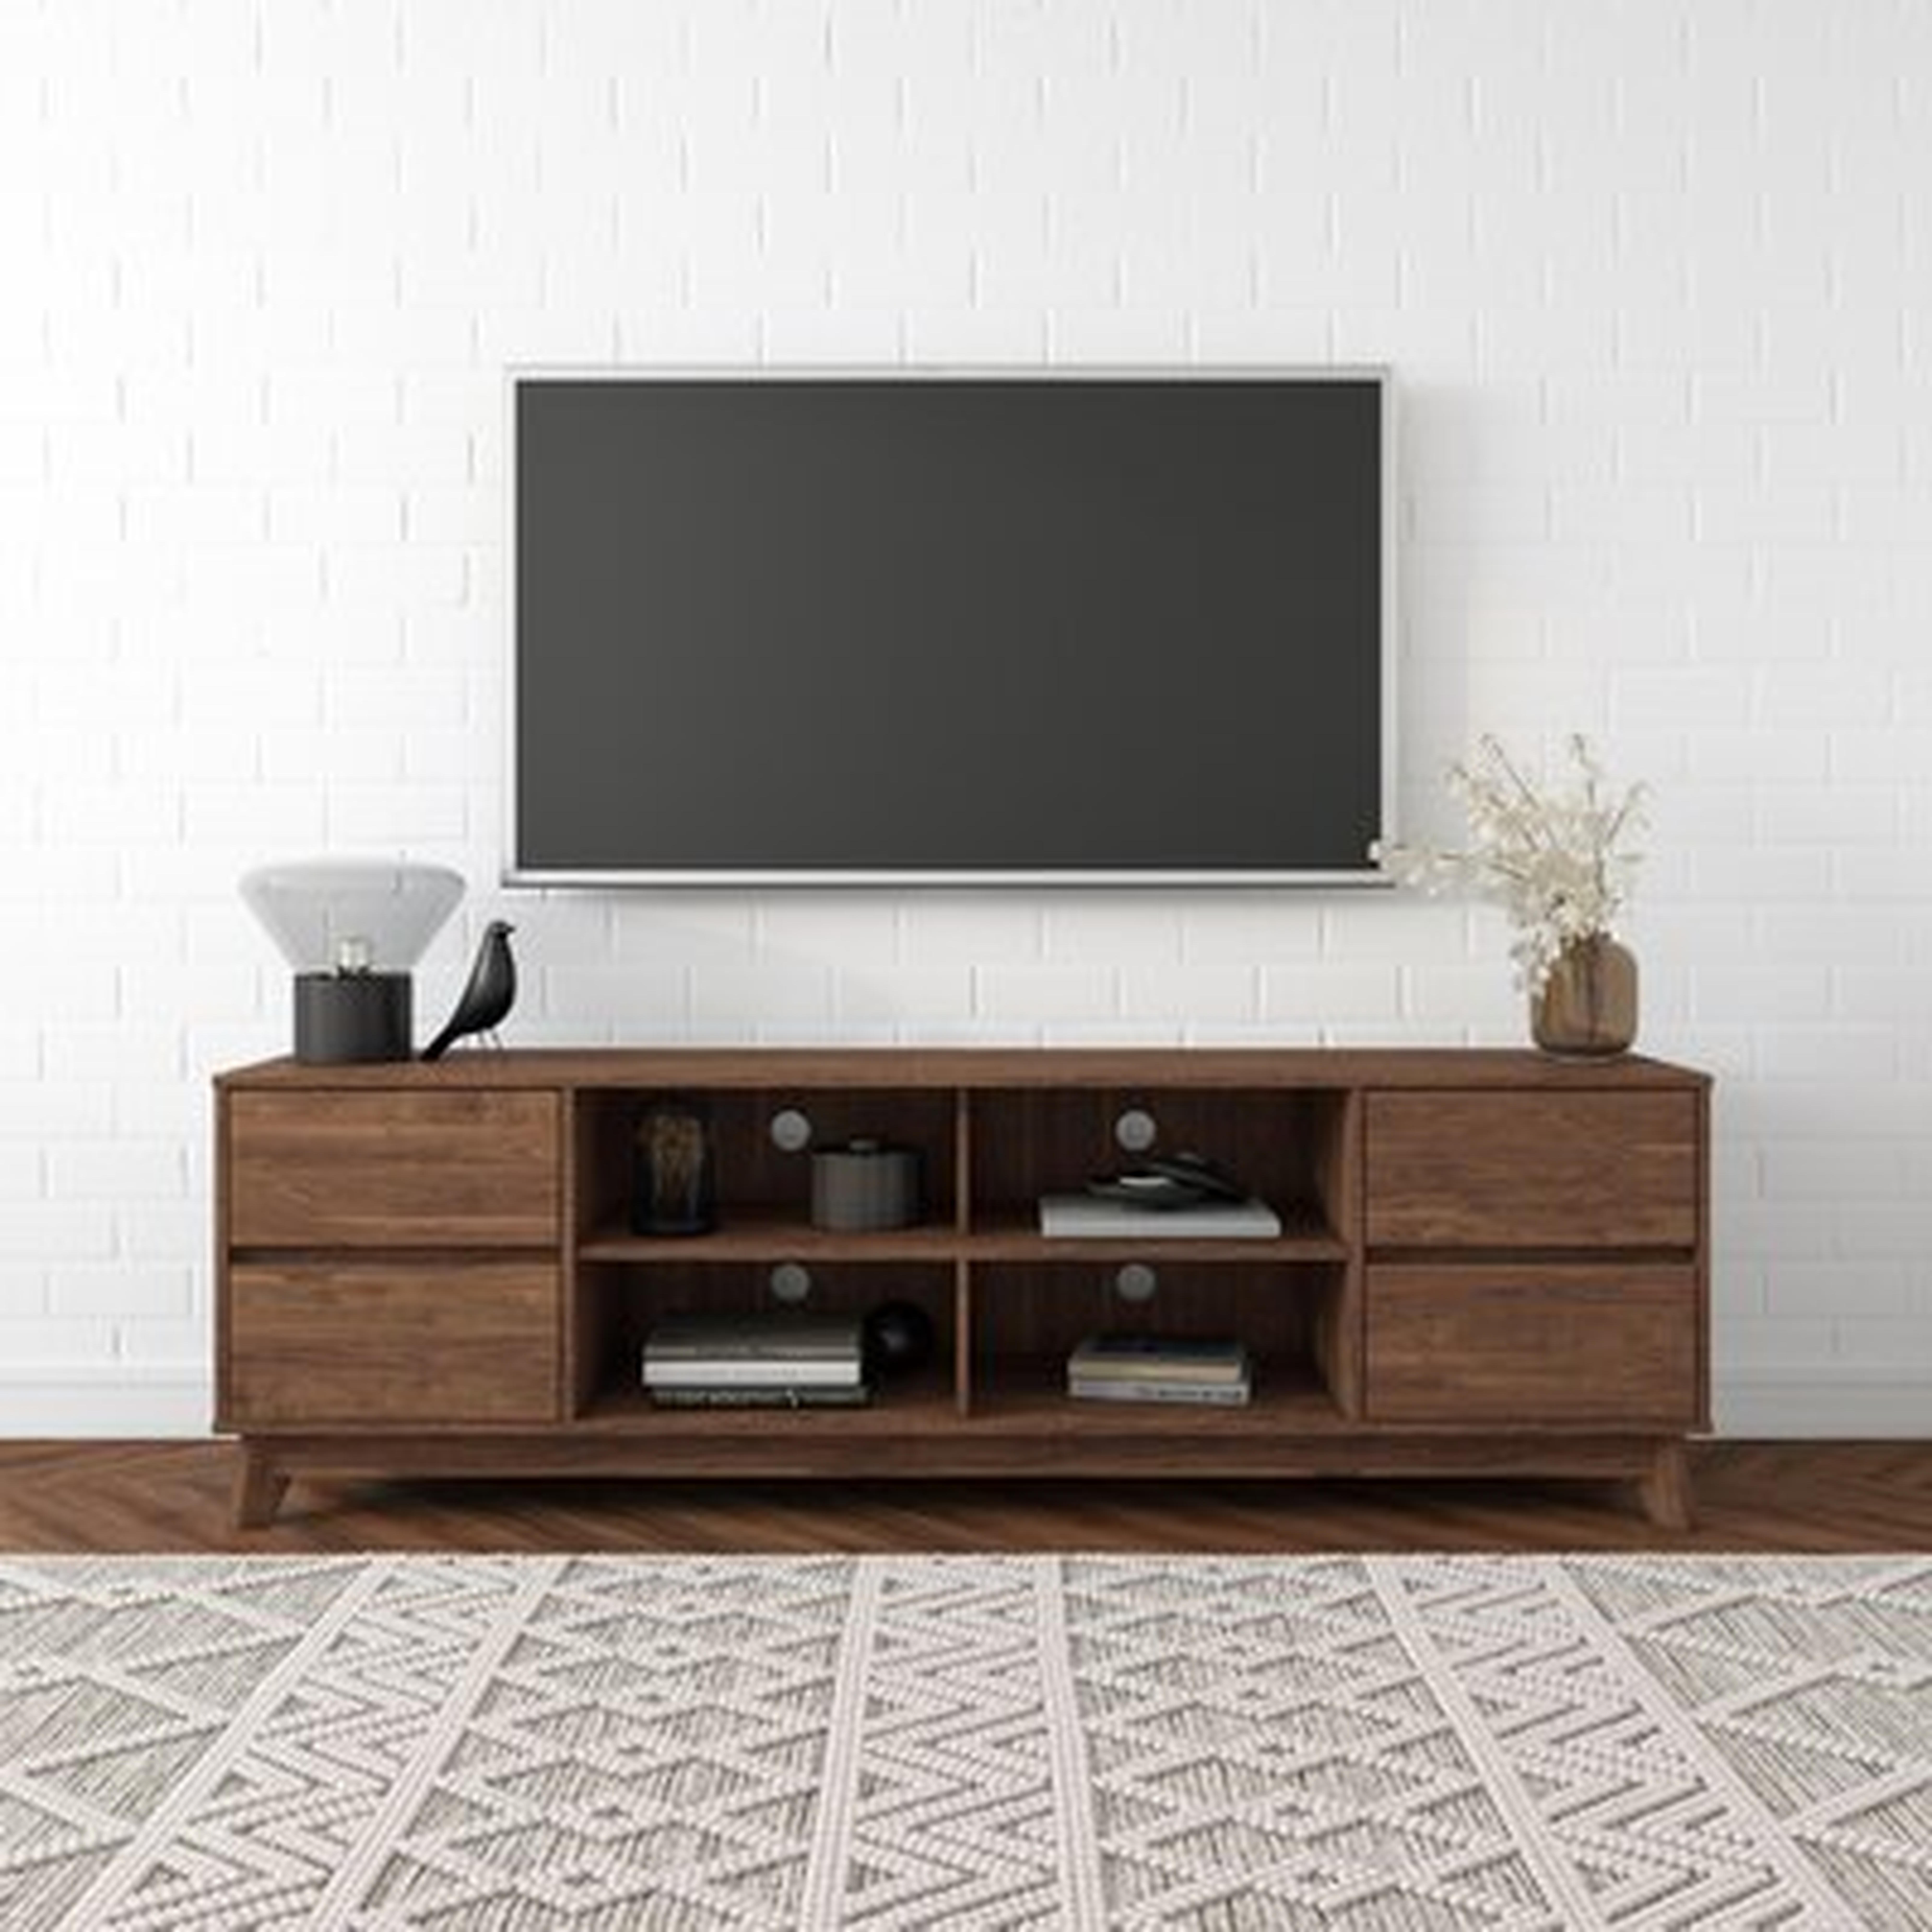 Rudd Grey Wood Grain TV Stand With Drawers For Tvs Up To 85" - Wayfair